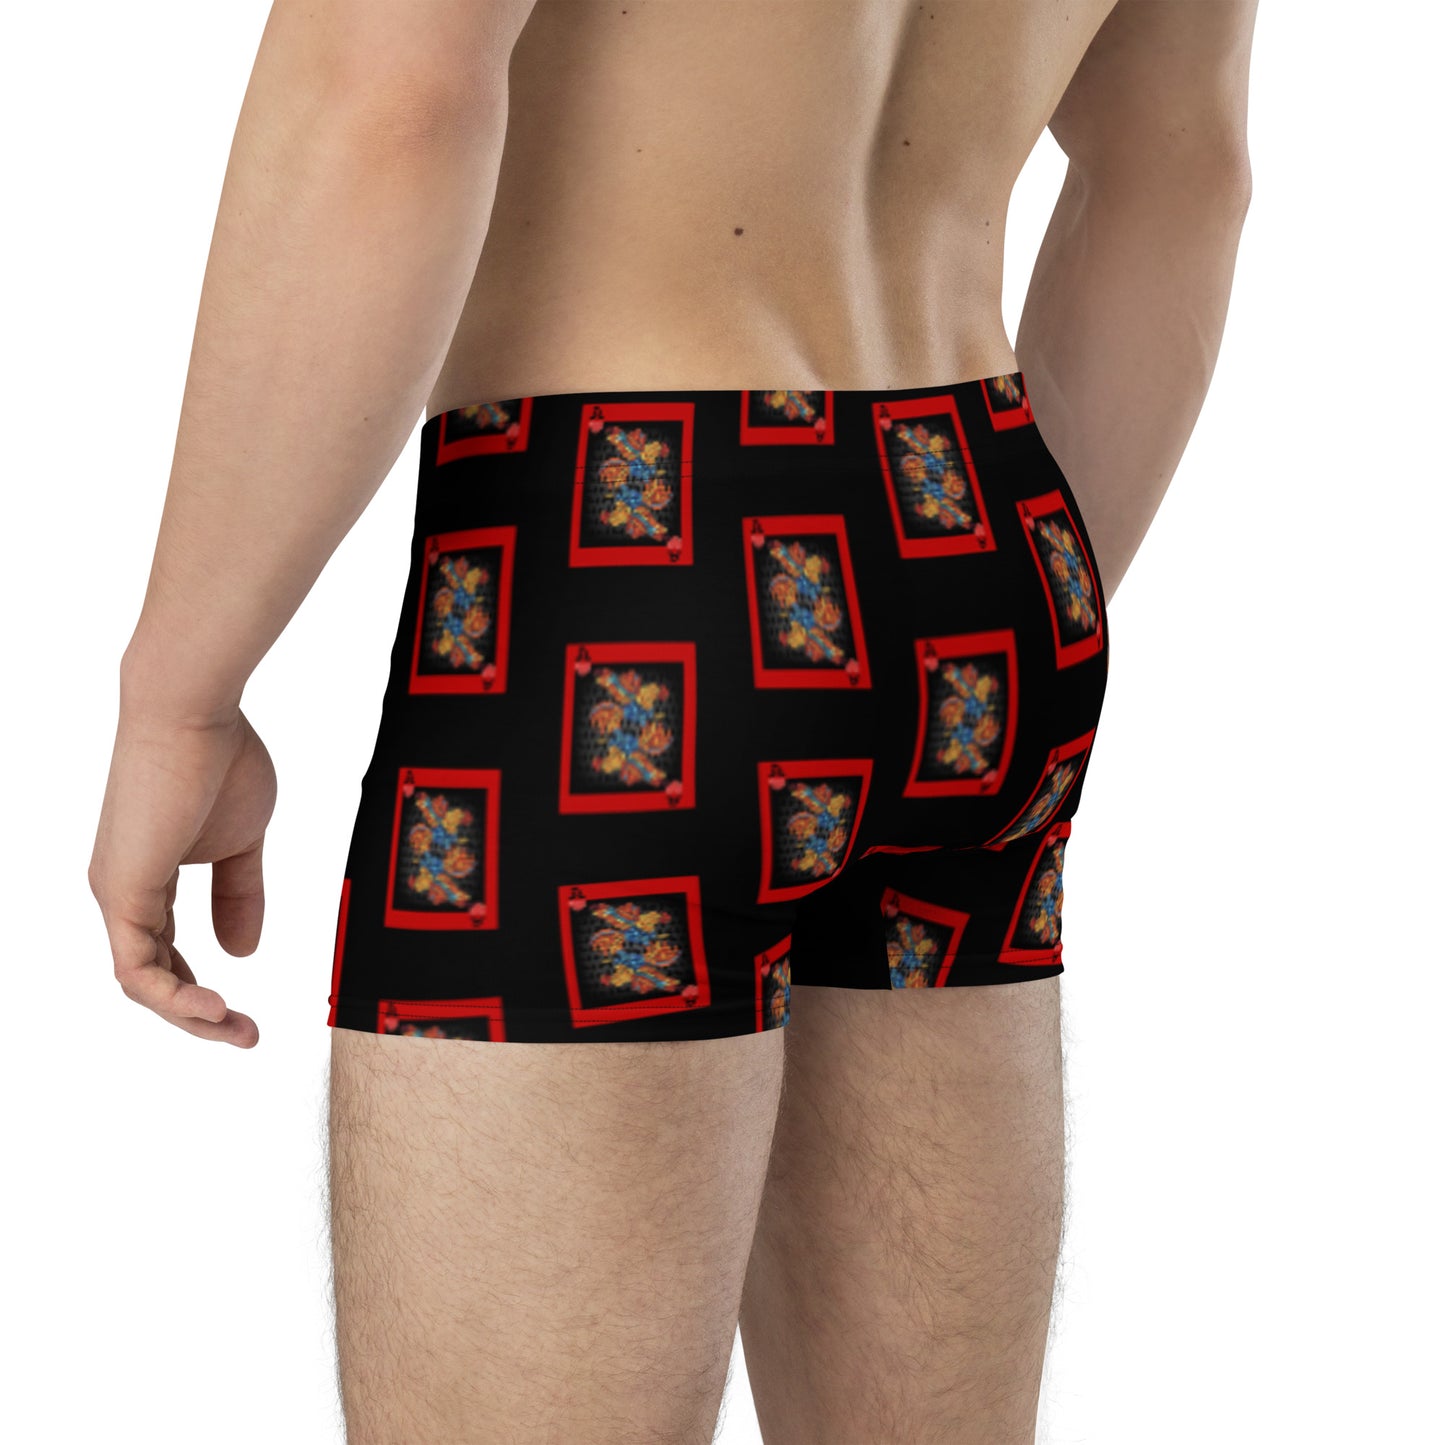 DECK OF CARDS ACE Gamefowl Rooster Black Briefs